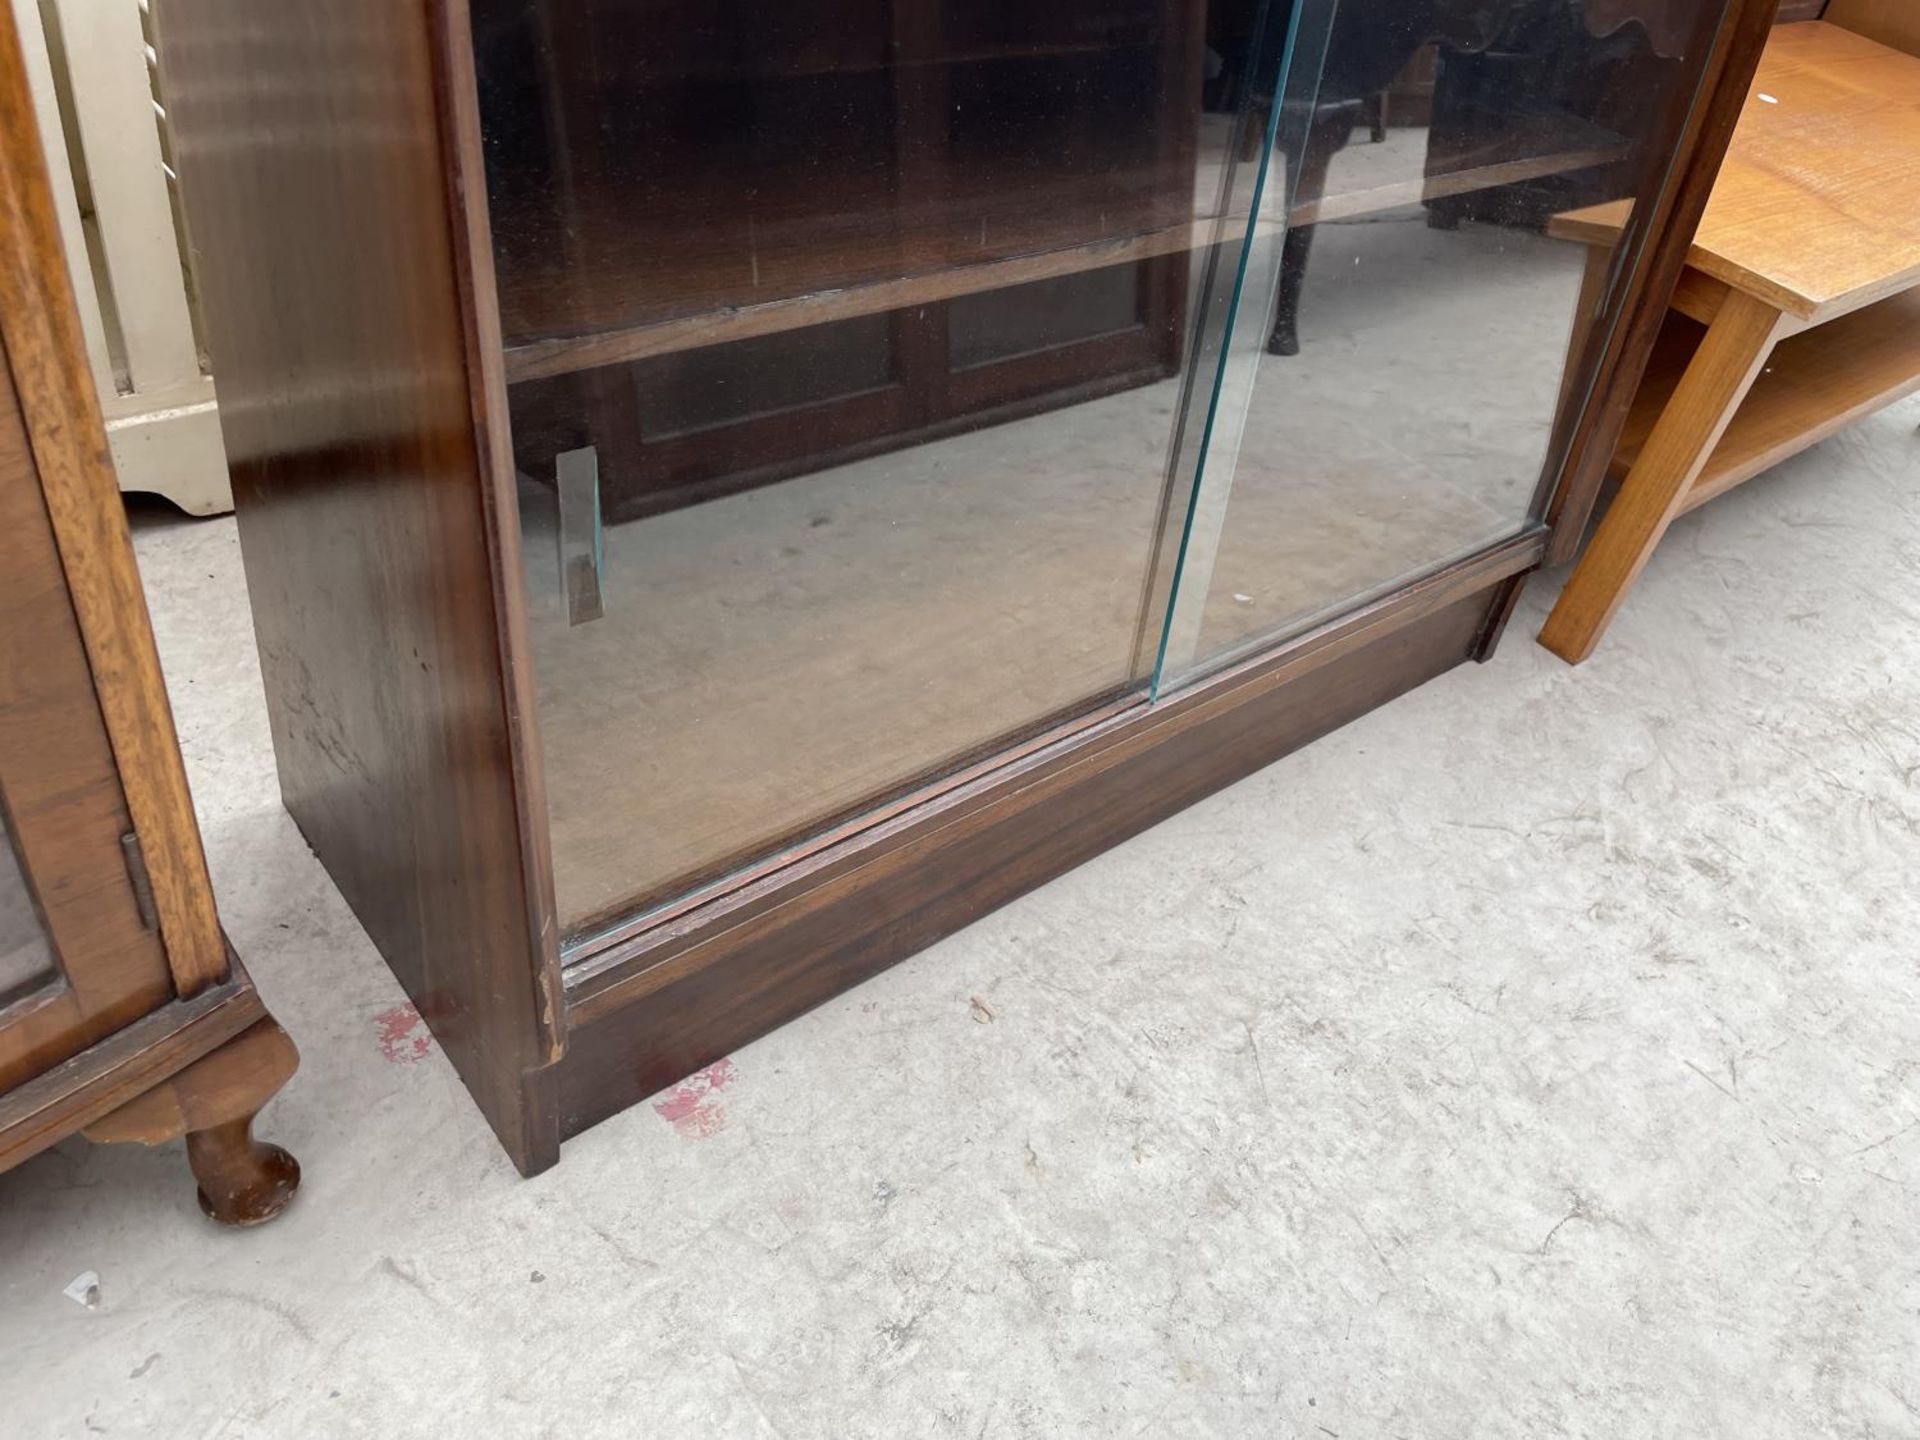 A MID 20TH CENTURY MAHOGANY SLIDING GLASS FRONTED BOOKCASE, 36" WIDE - Image 3 of 3